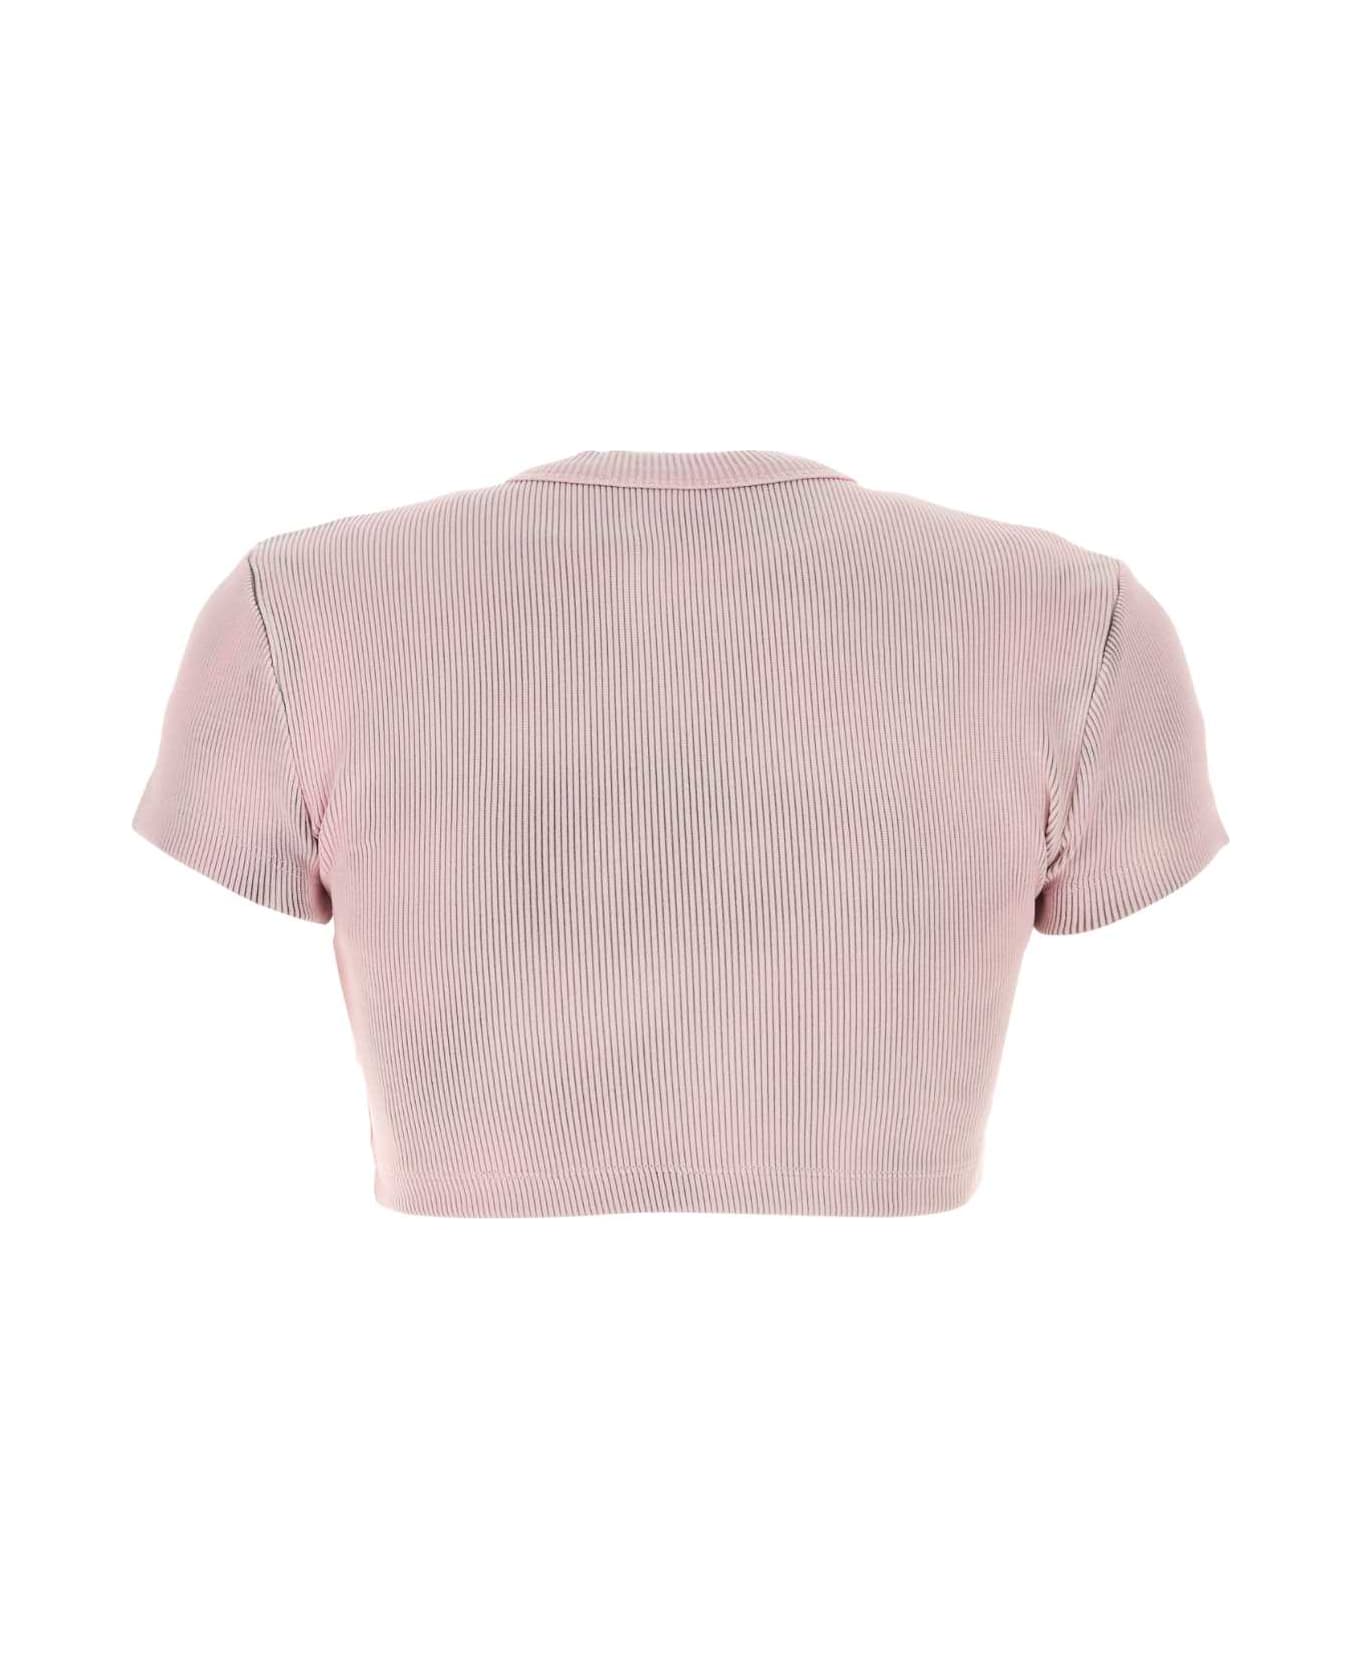 T by Alexander Wang Pink Stretch Cotton T-shirt - WASHEDPINKLACE